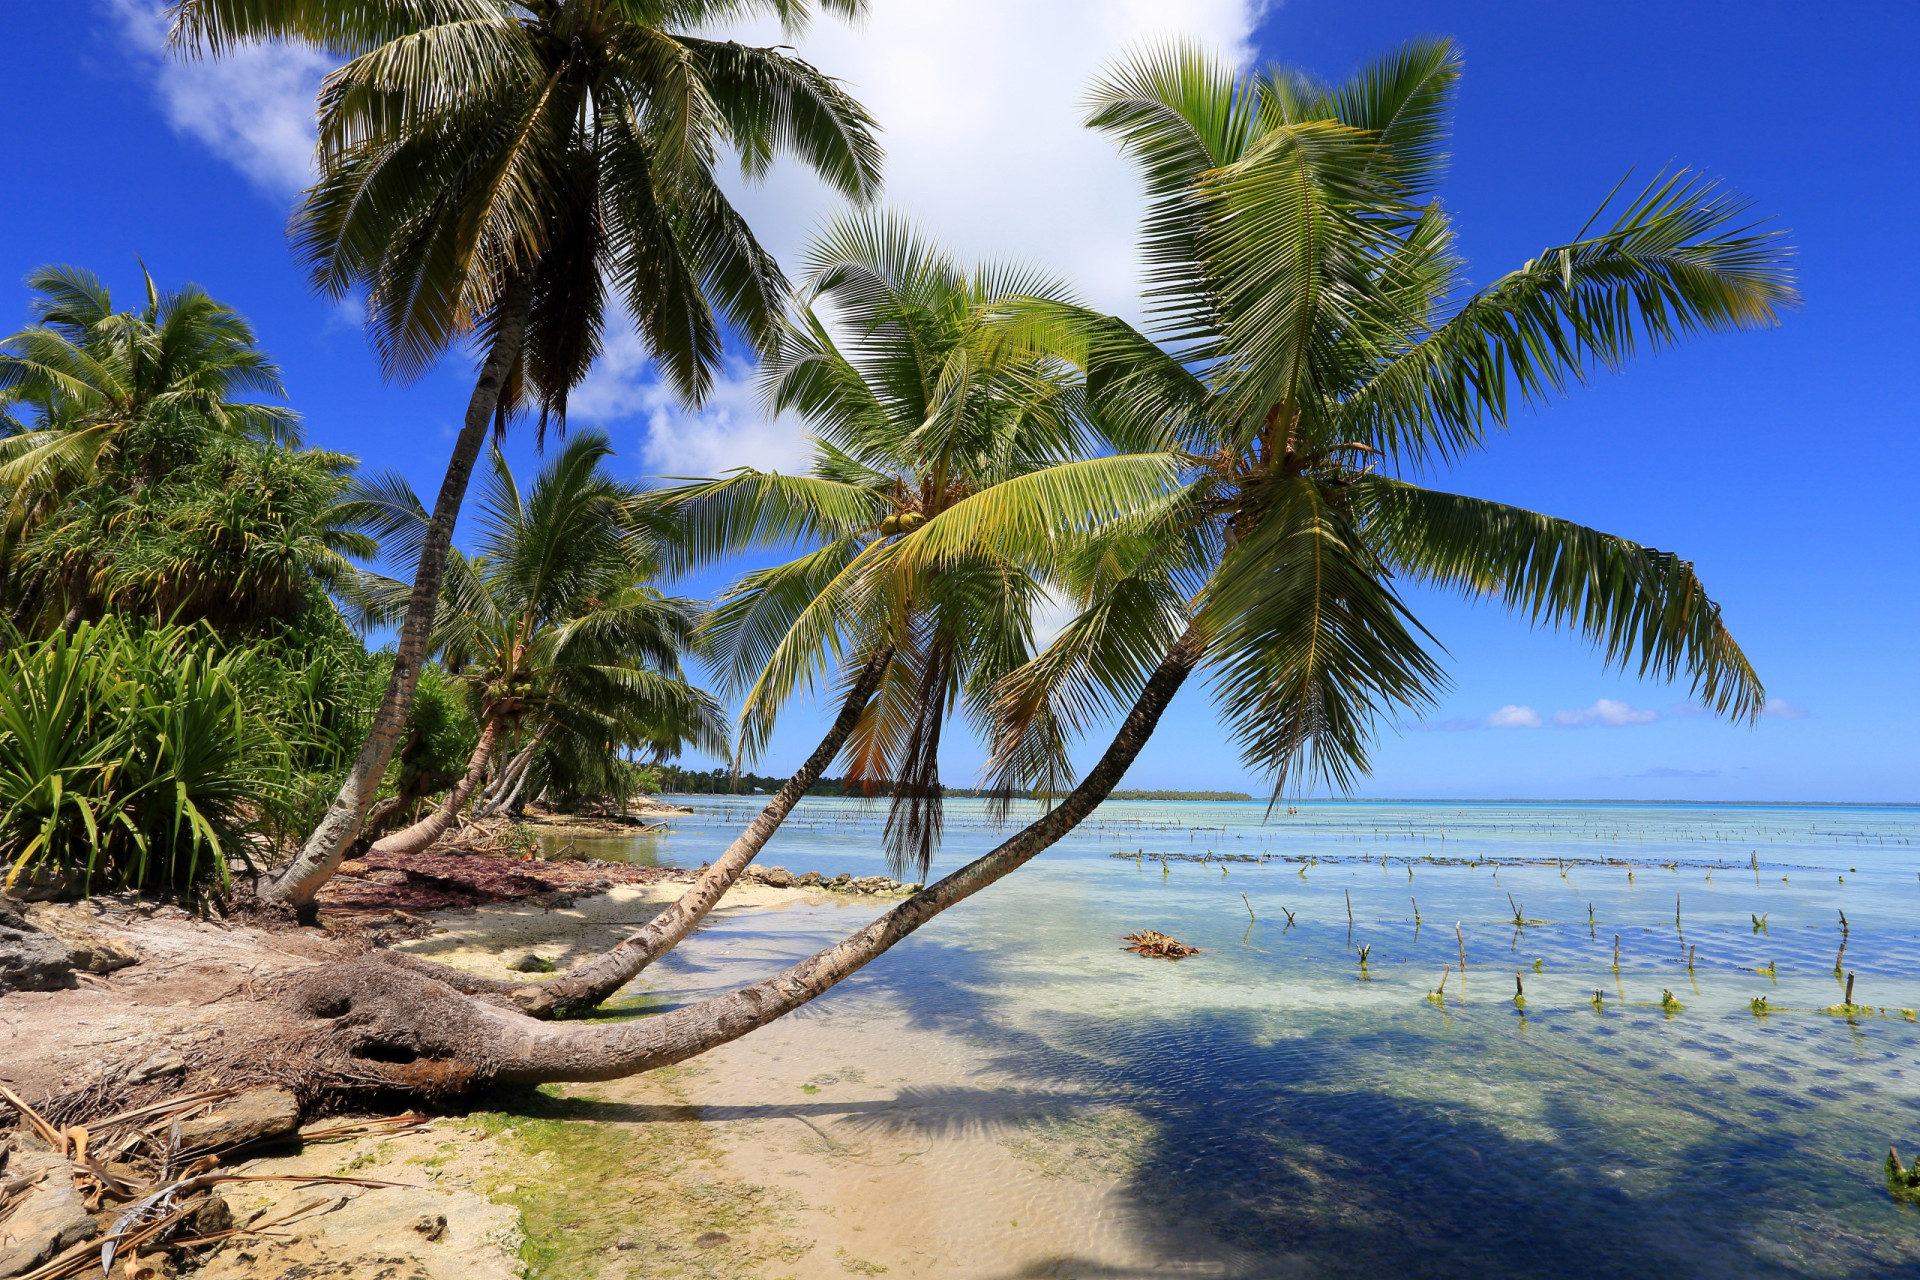 <p>Much of Kiribati’s population lives off the economic value of subsistence farming and fishing. Although the islands contain coconut and breadfruit trees, agriculture faces significant challenges due to poor soil quality and limited freshwater.</p><p>You may also like:<a href="https://www.starsinsider.com/n/146581?utm_source=msn.com&utm_medium=display&utm_campaign=referral_description&utm_content=717375en-us"> Get a flat belly in 30 easy steps</a></p>